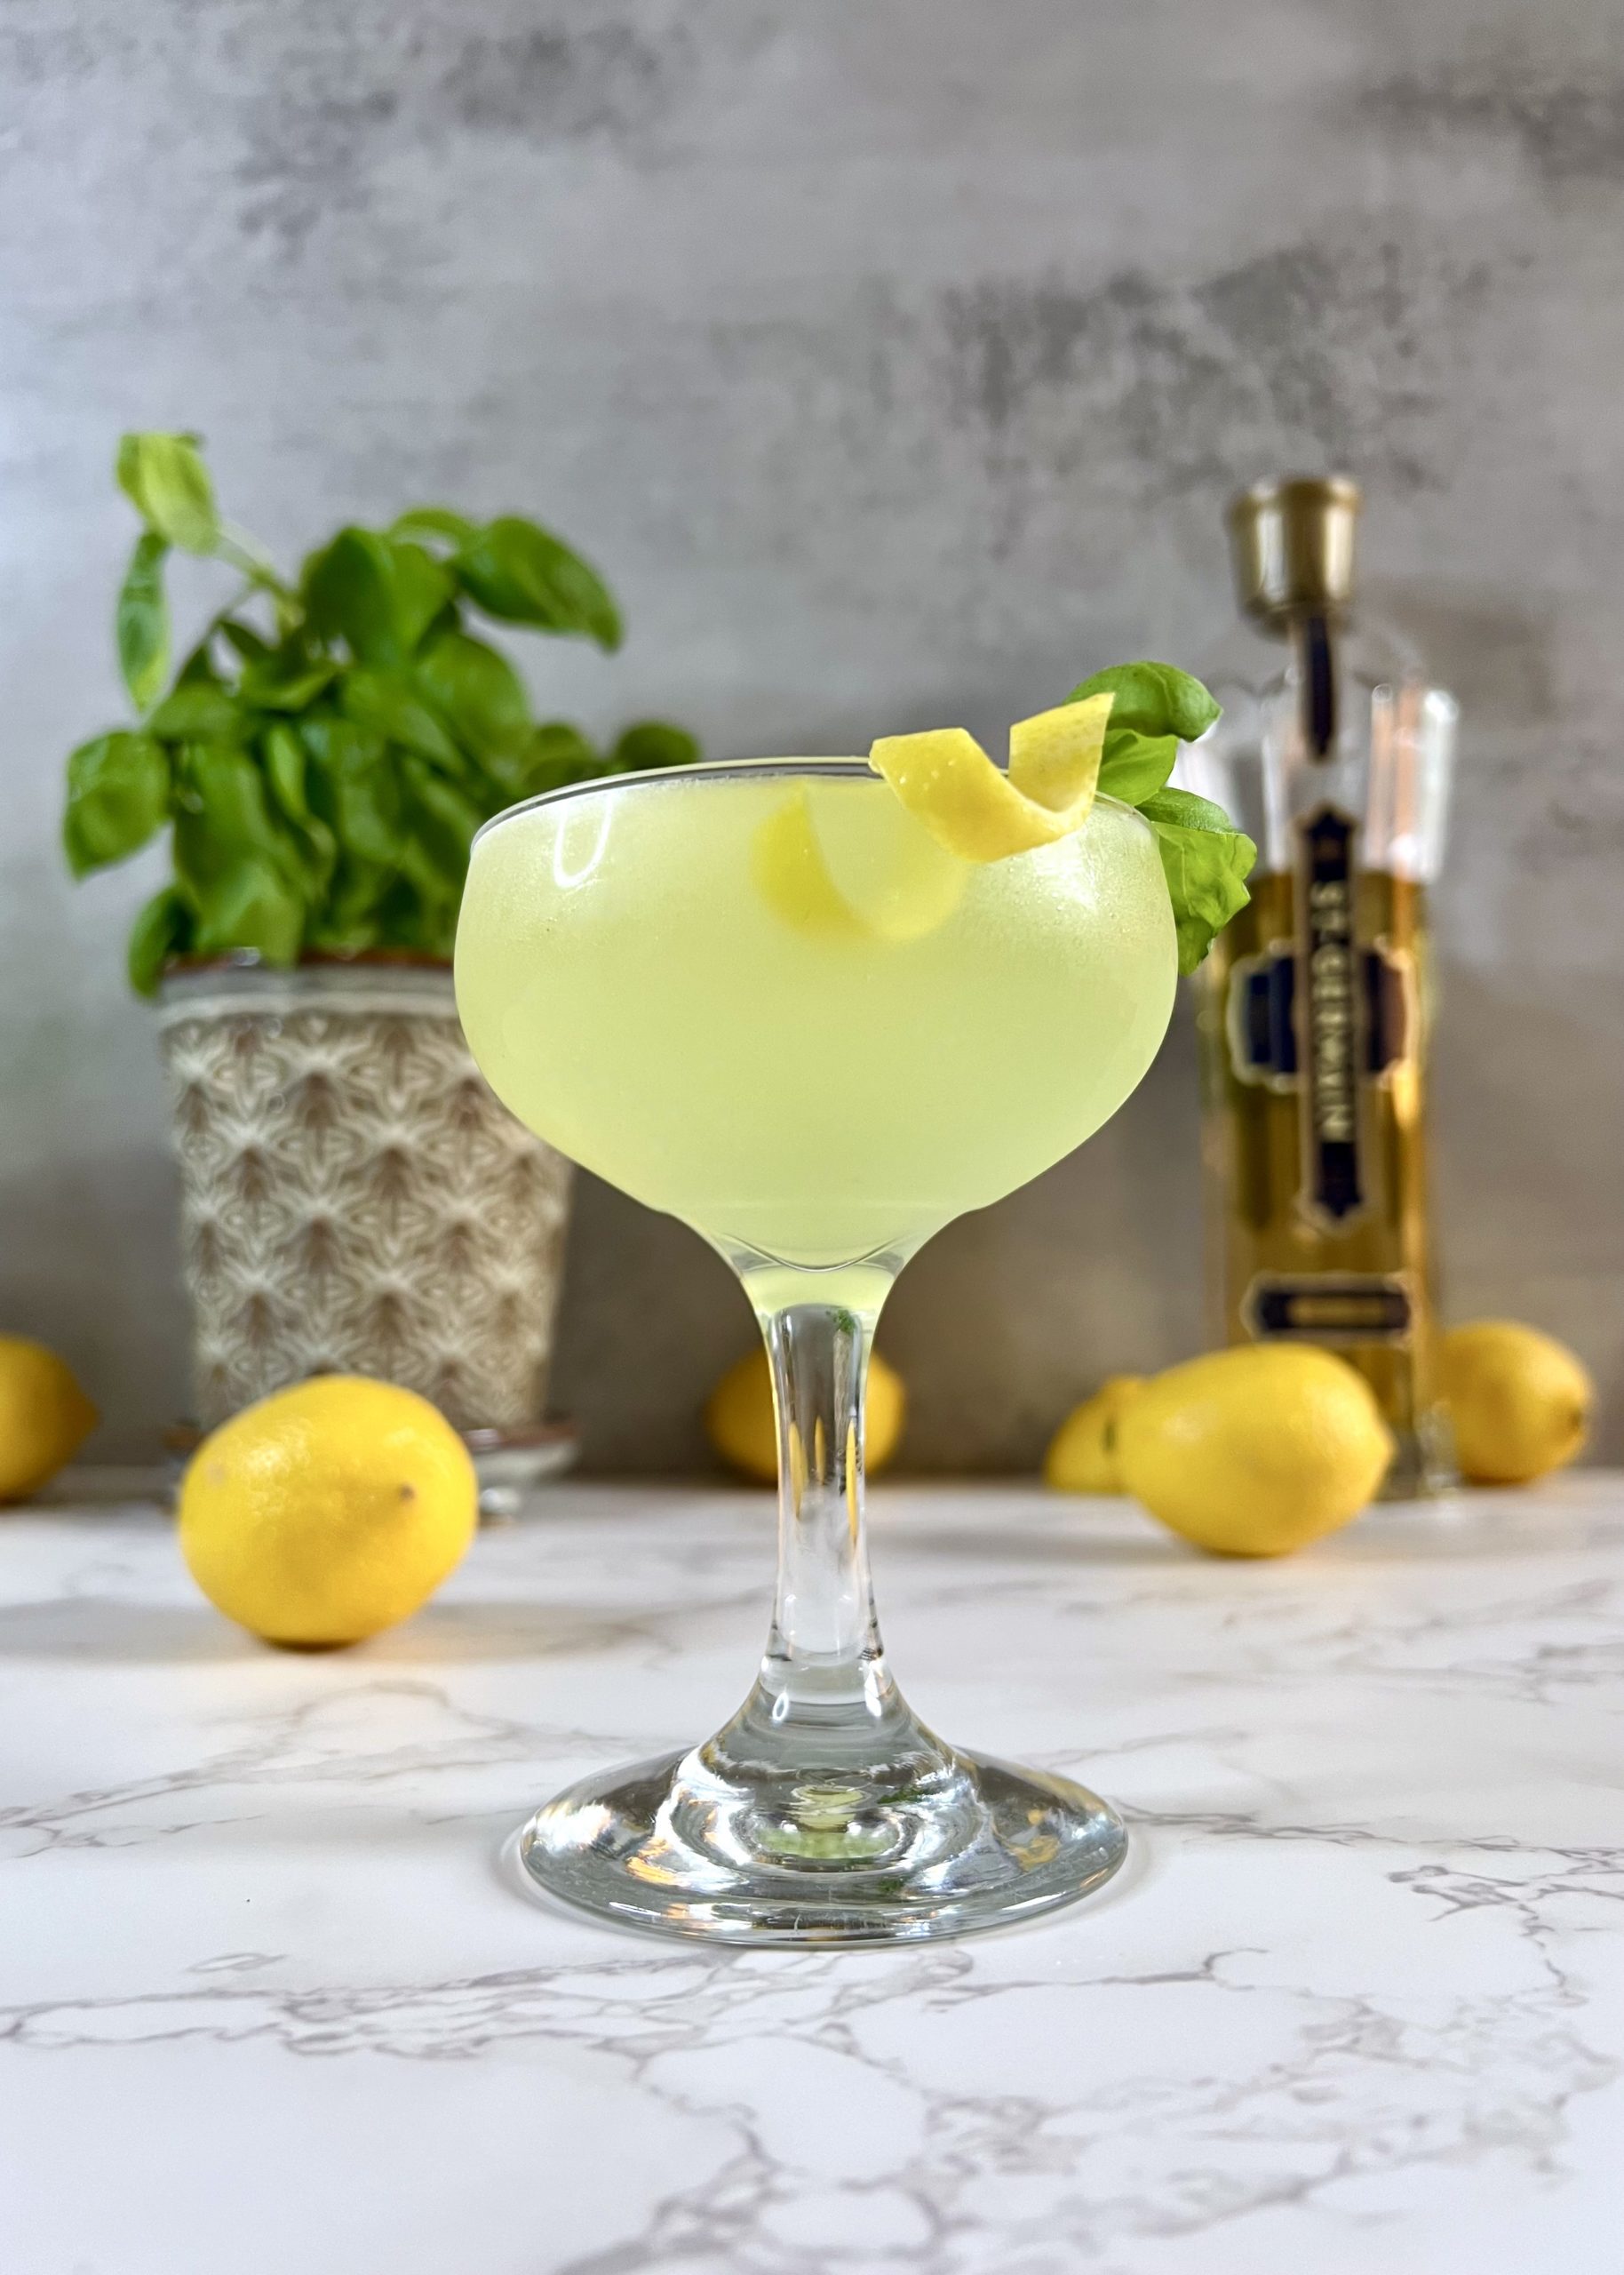 A St Germain Lemon Basil Martini in the foreground garnished with a lemon twist and sprig of basil with a basil plant, a bottle of St Germain liqueur, and lemons in the background.